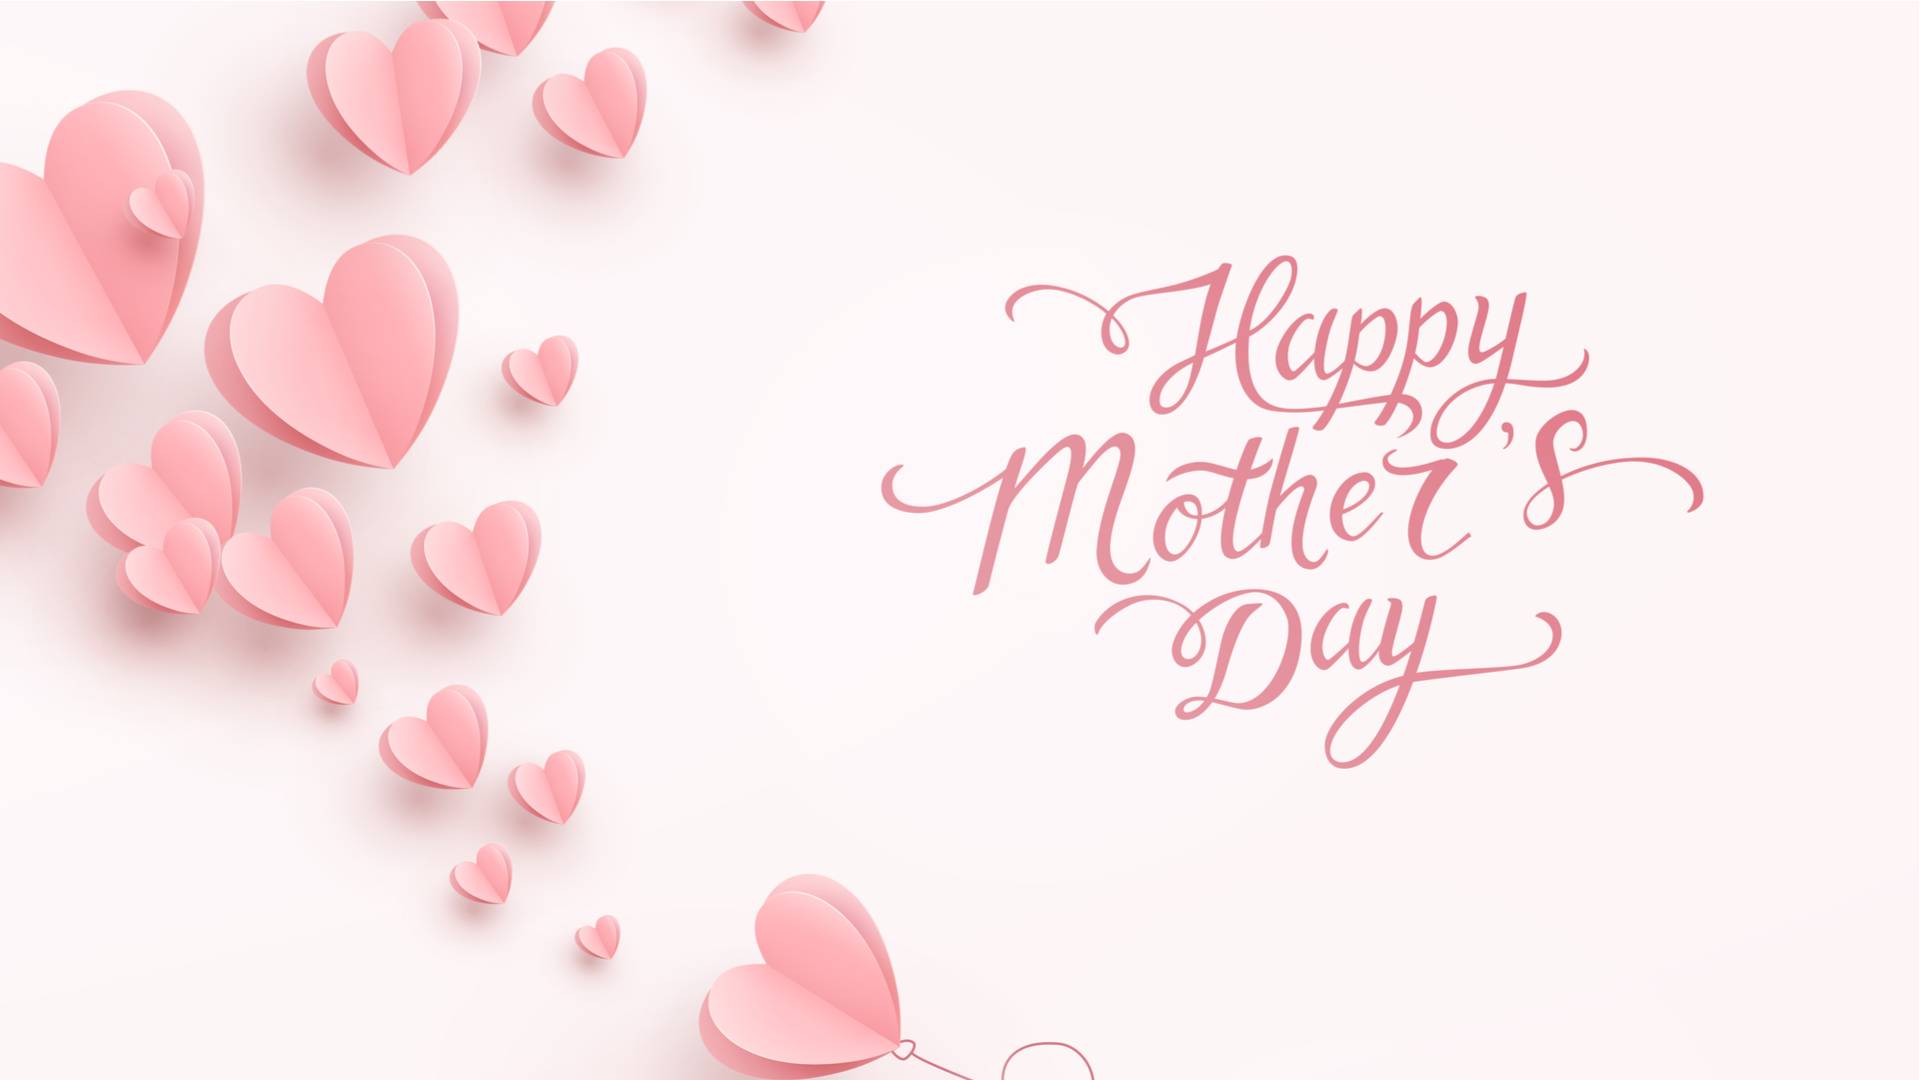 Mothers Day S Day 2020 Date Wishes Quotes Image History Significance Of International Mothers Day / Spiritual origins of mother's day